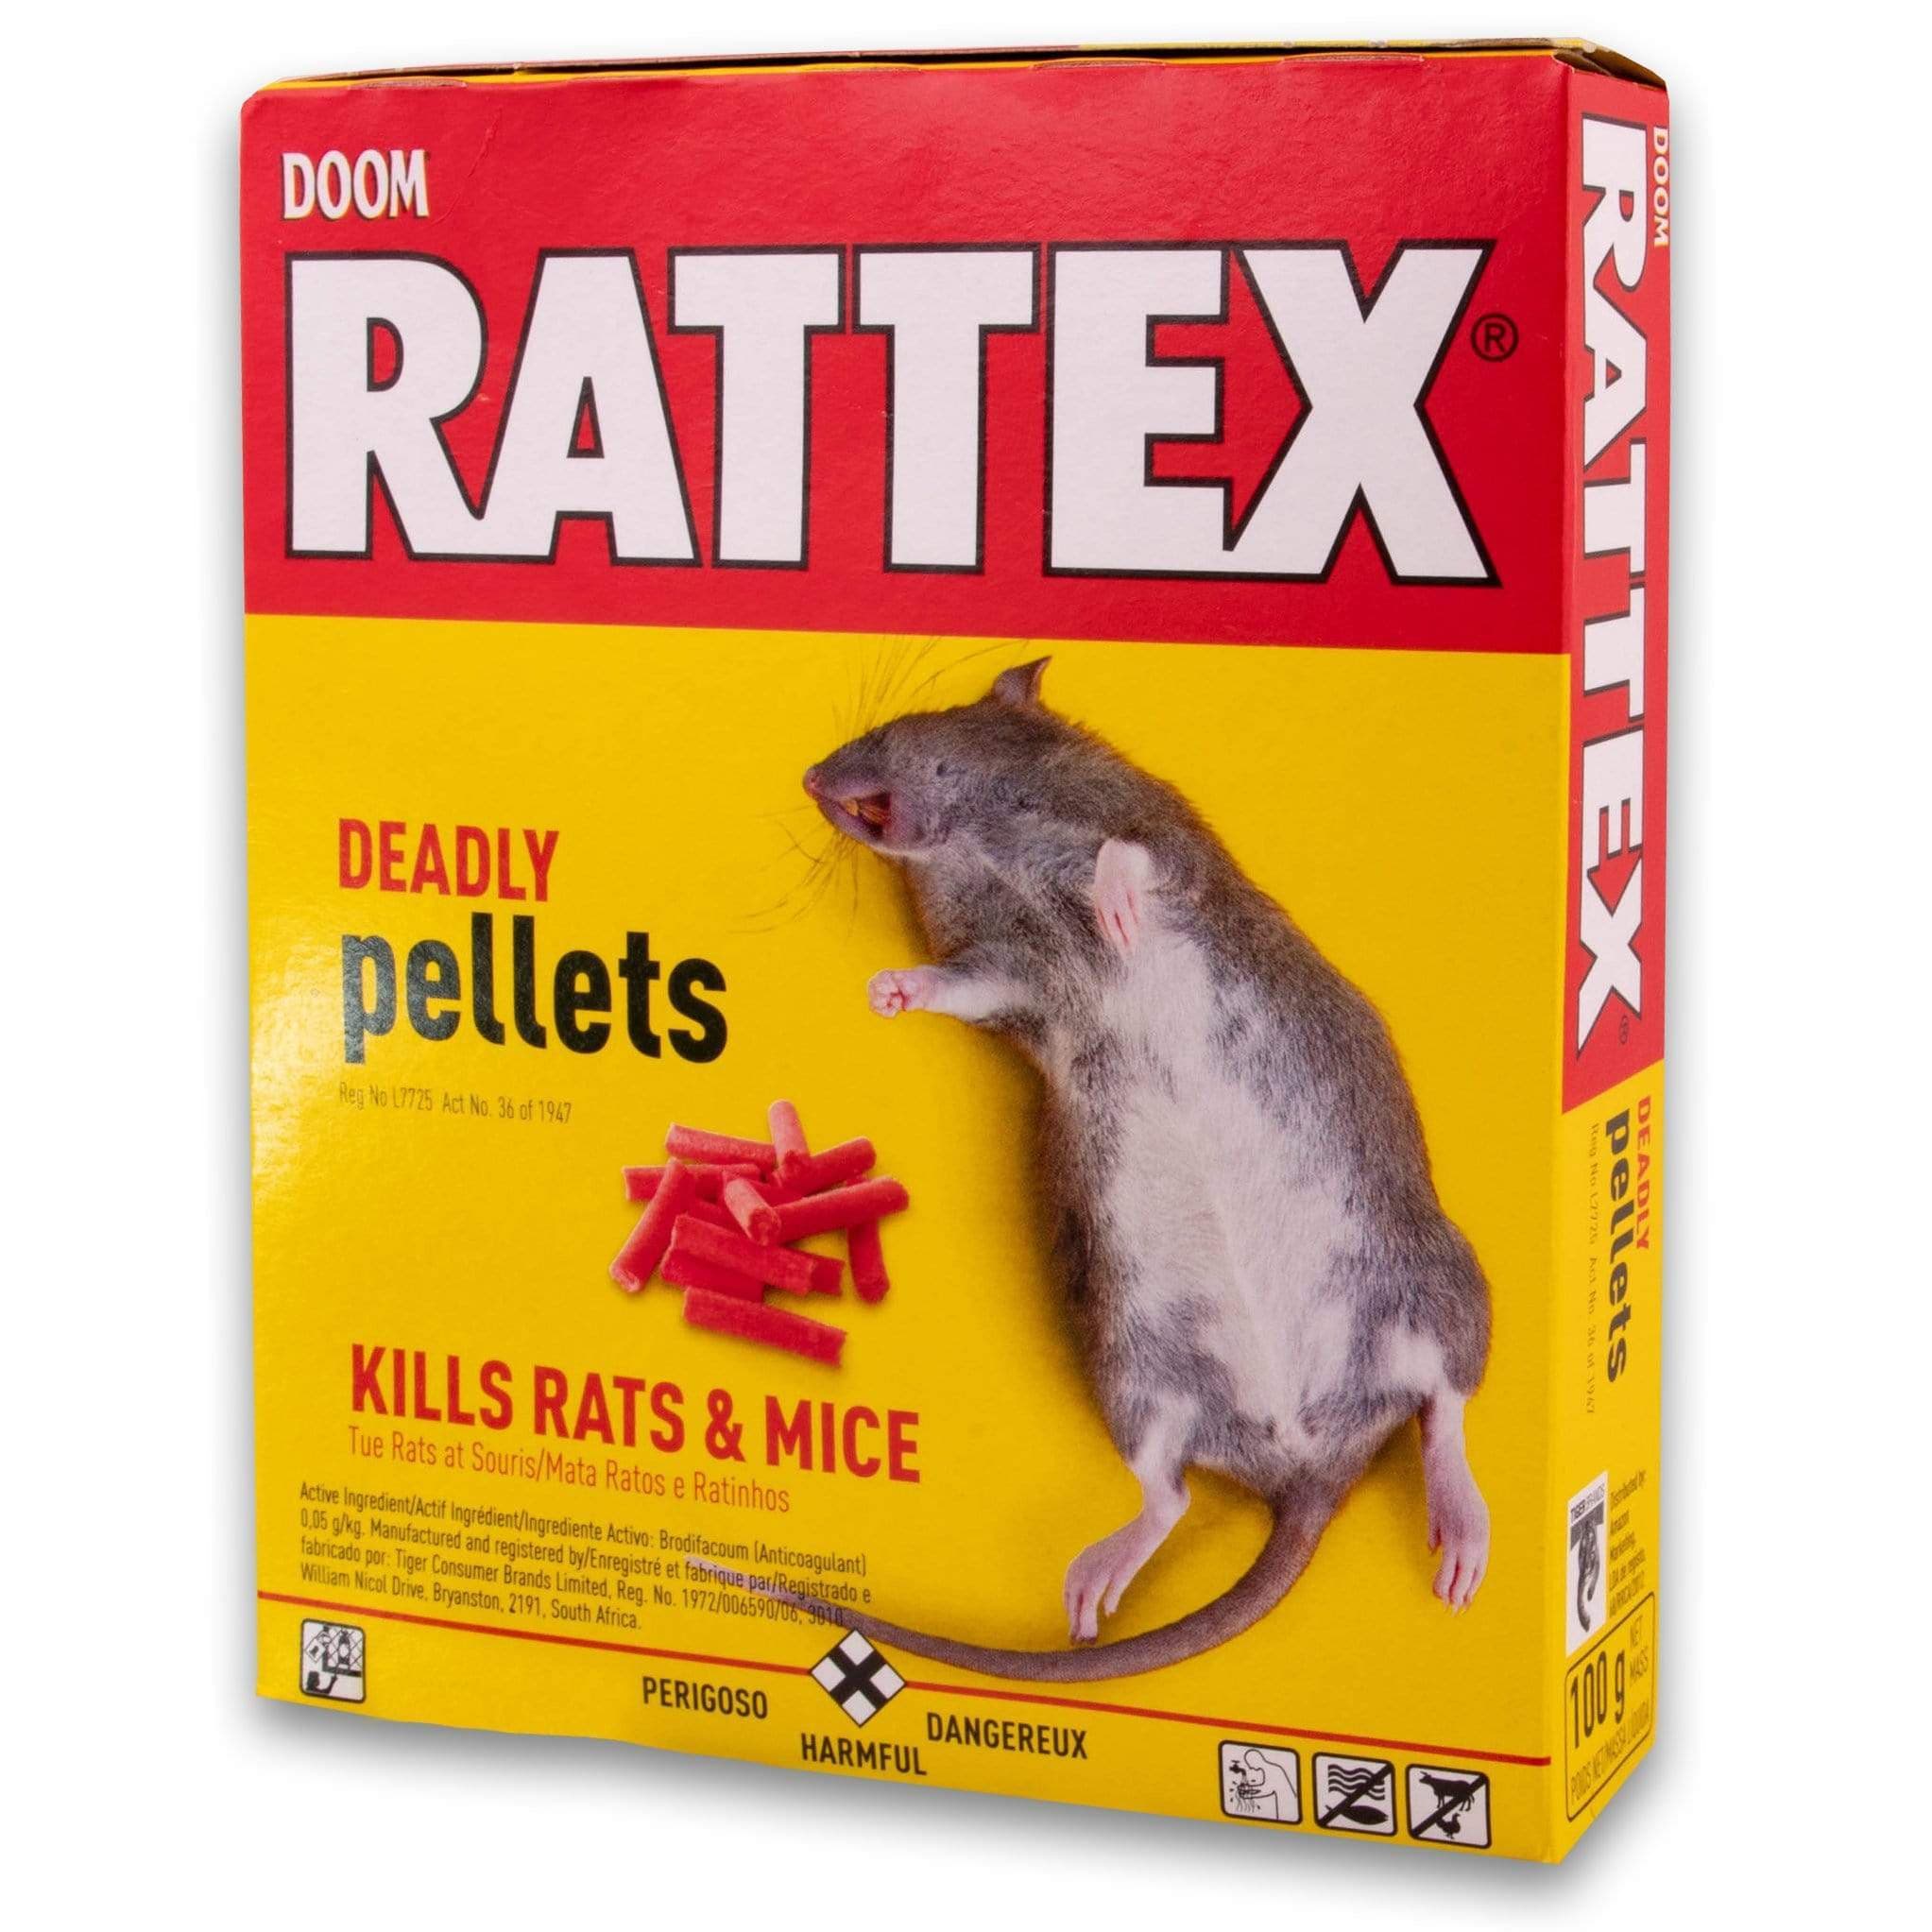 Doom Rattex Deadly Pellets Rat Poison 100g, Household Insecticides, Cleaning, Household